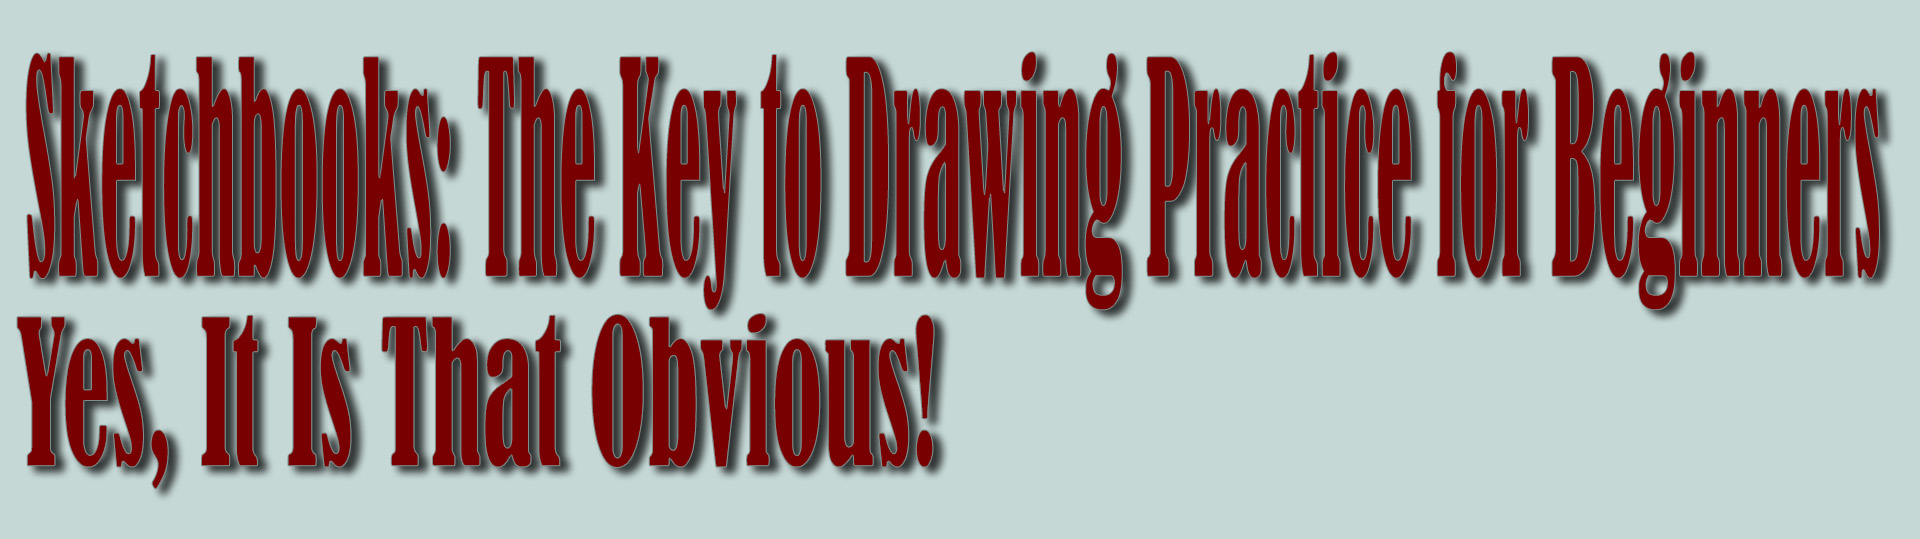 Sketchbooks: The Key to Drawing Practice for Beginners